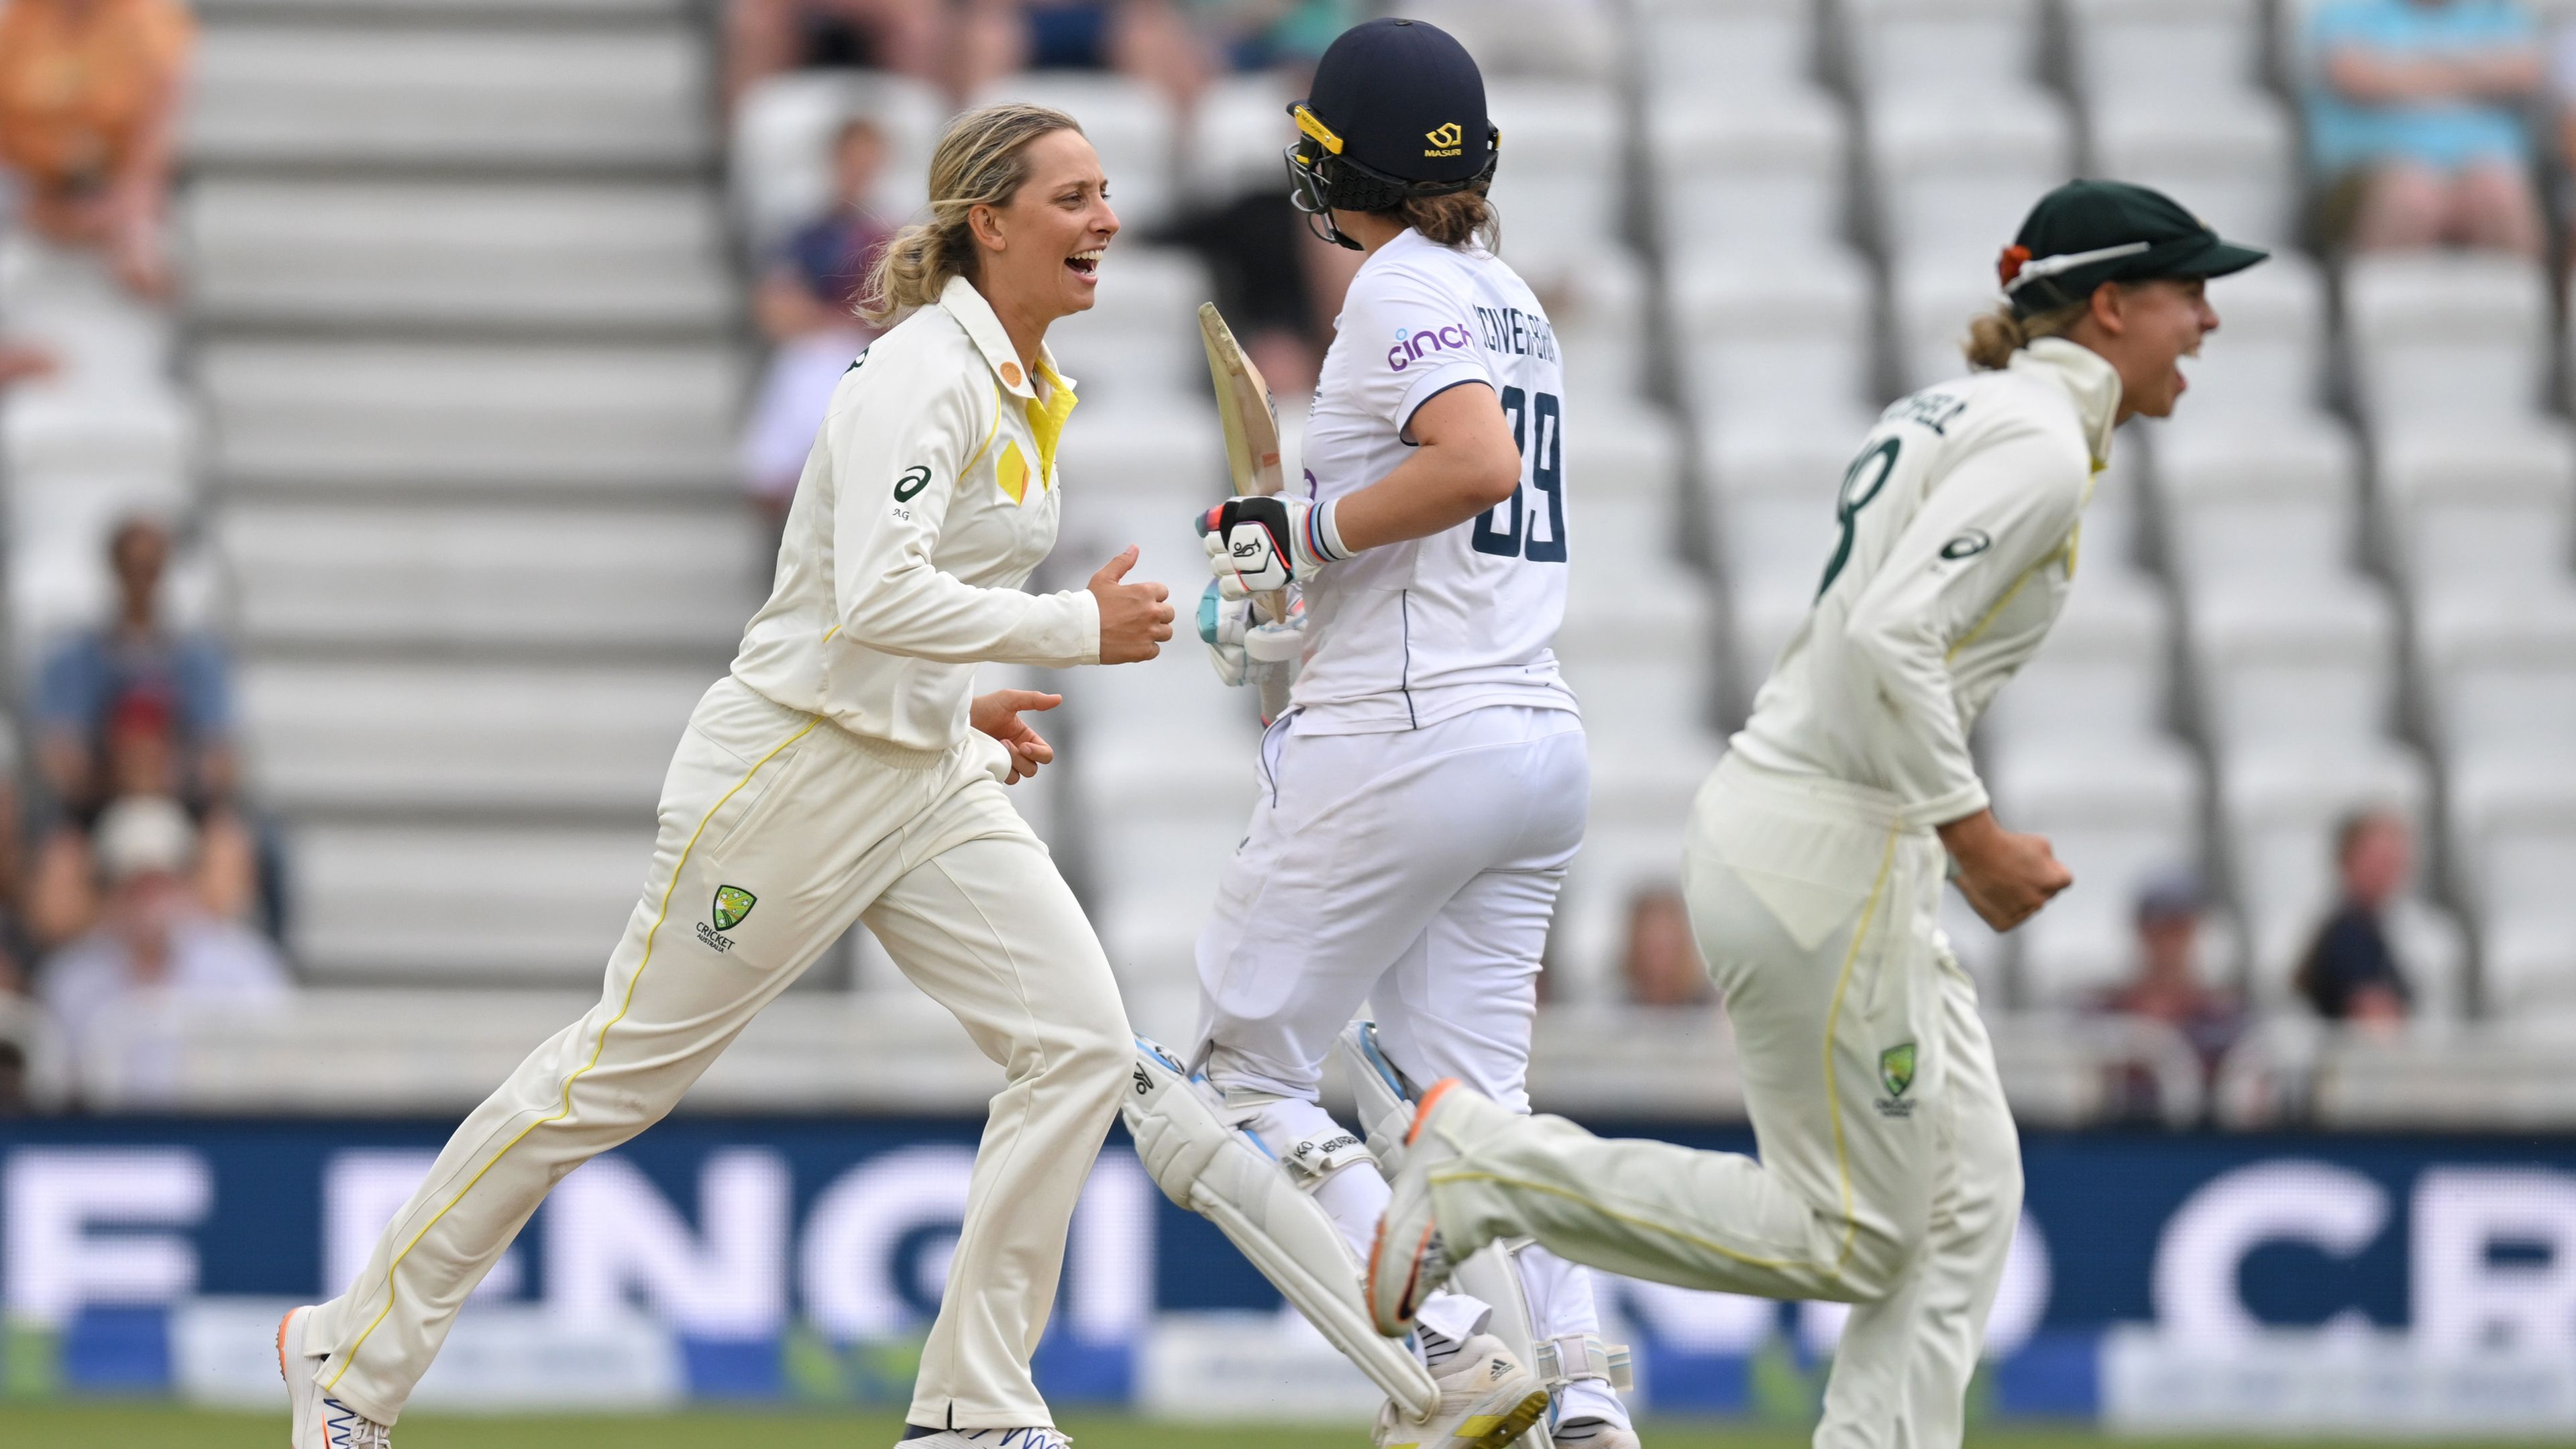 Superstar all-rounder's devastating spell puts Aussies in box seat to win Ashes Test